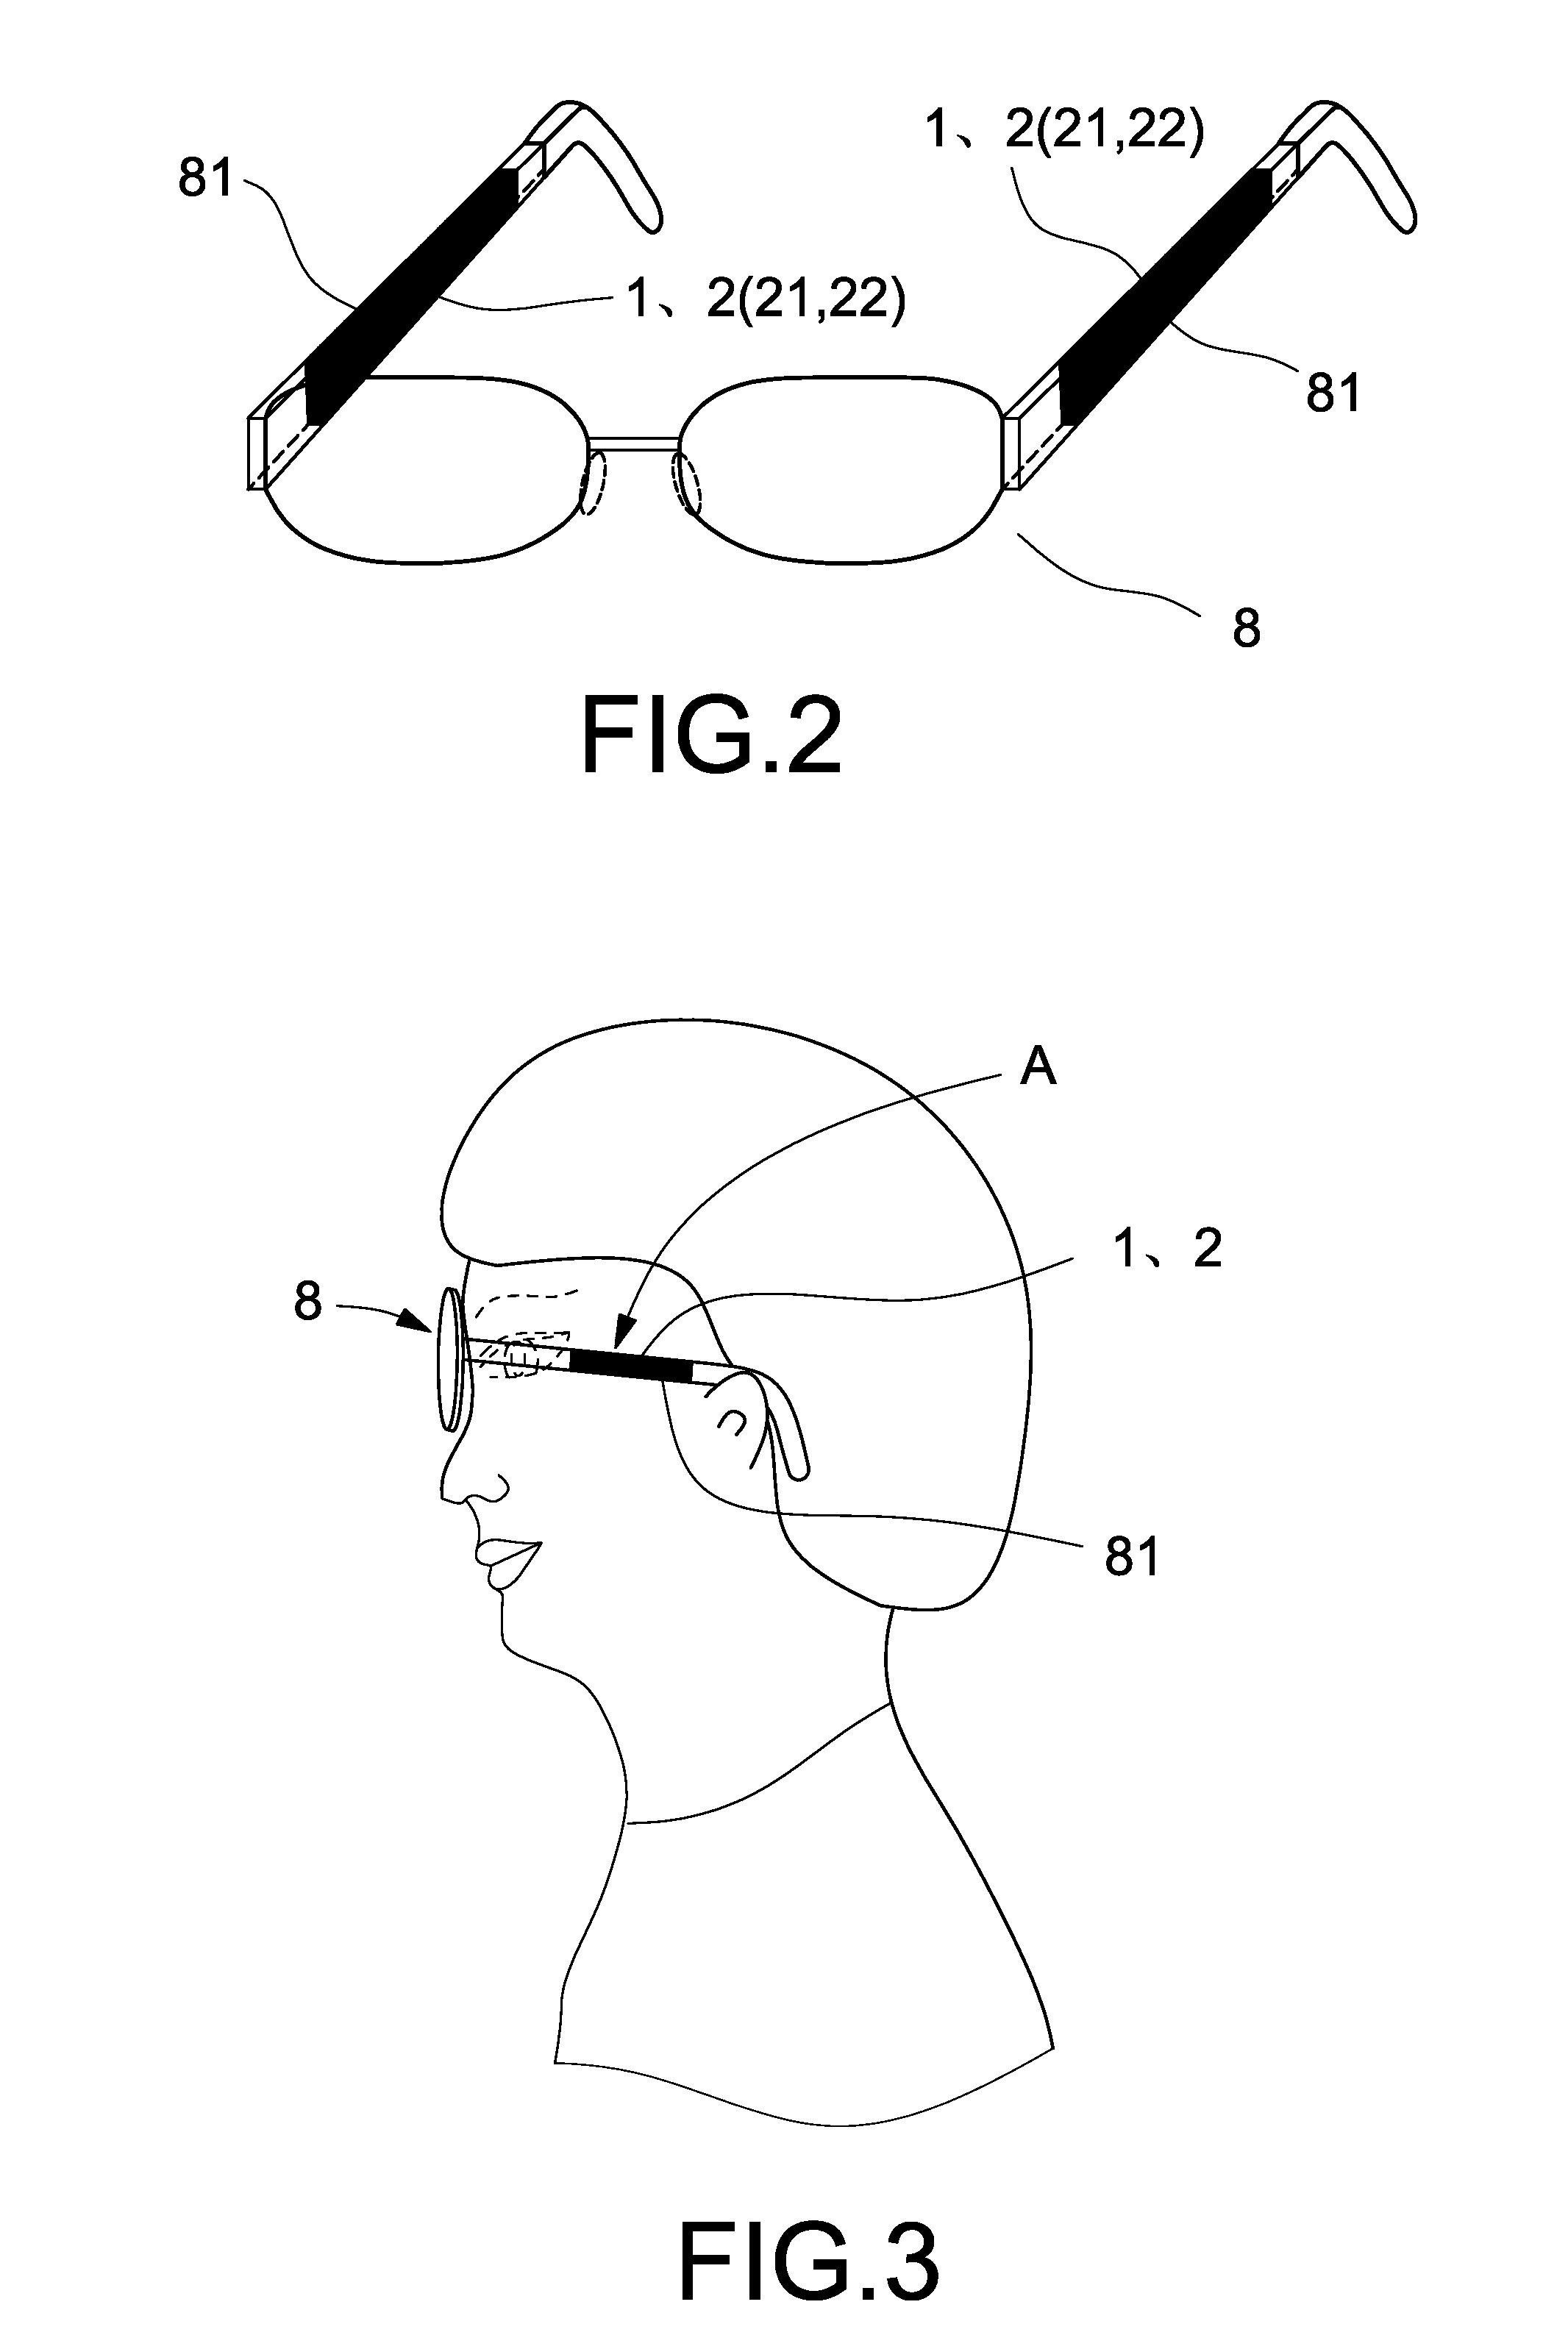 Spheno-temporal bone conduction communication equipment and/or hearing aid equipment